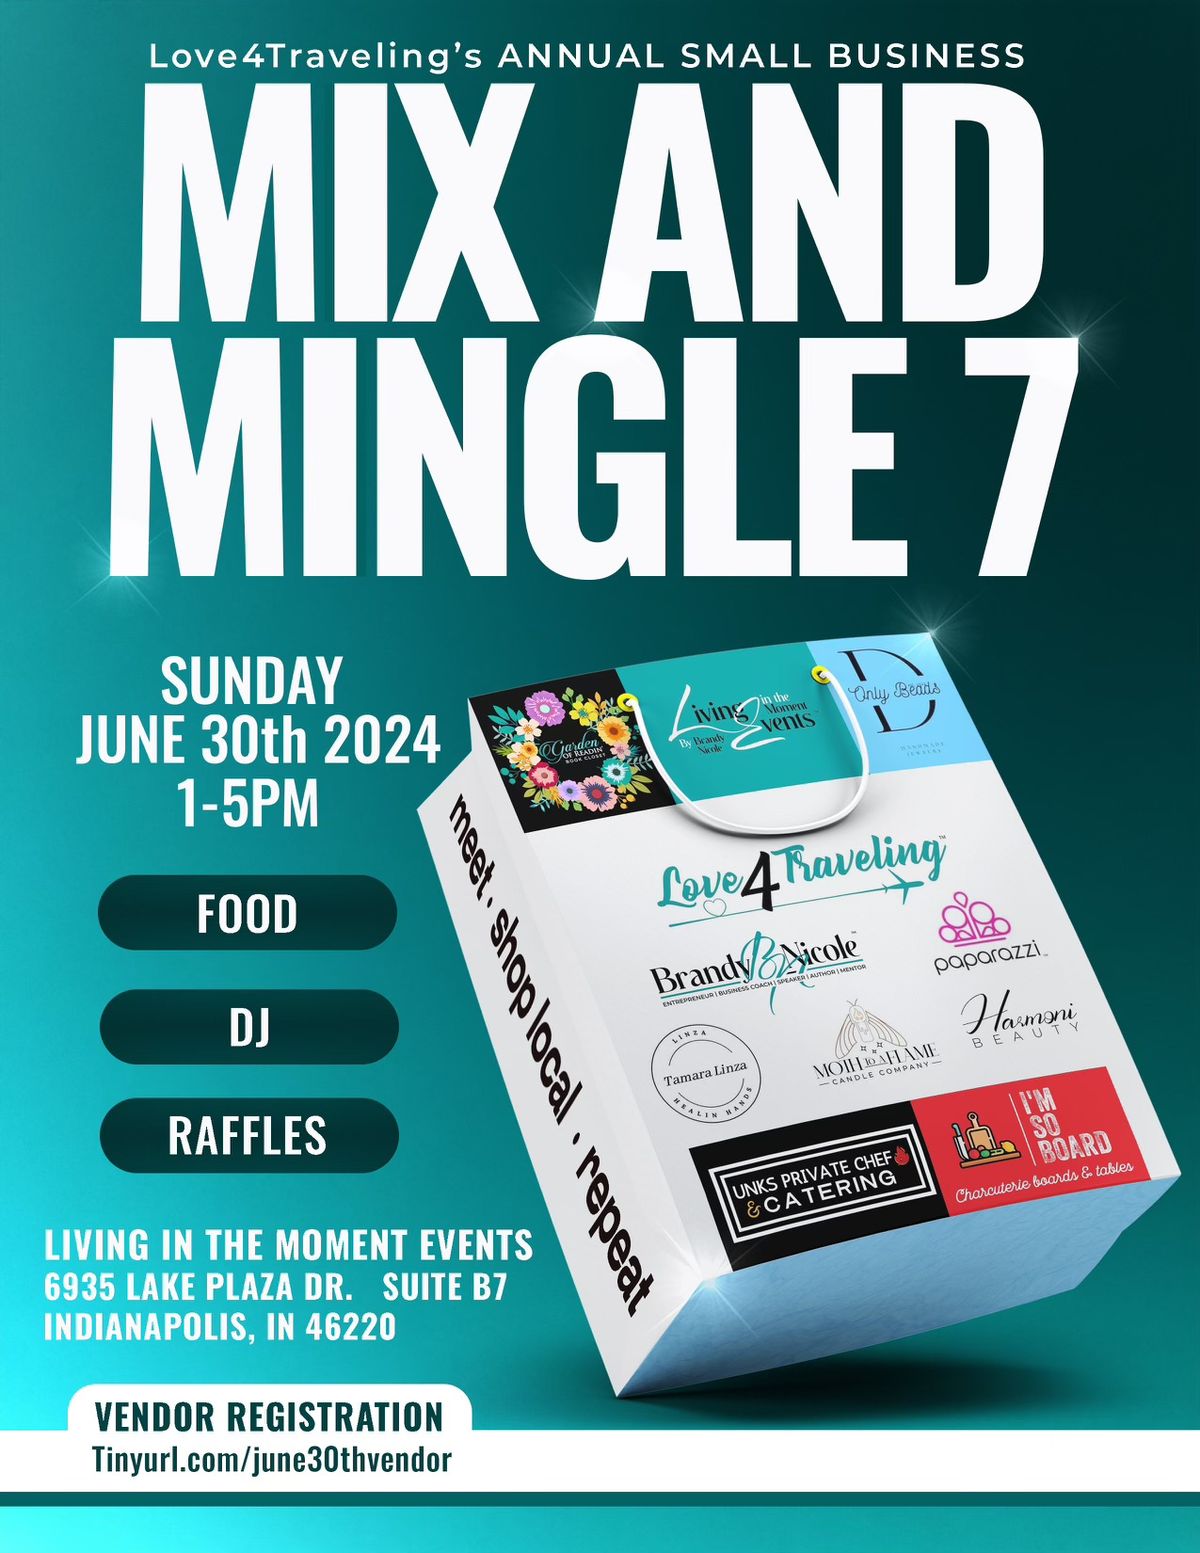 Love4traveling\u2019s 7th Annual Small Business Mix and Mingle 